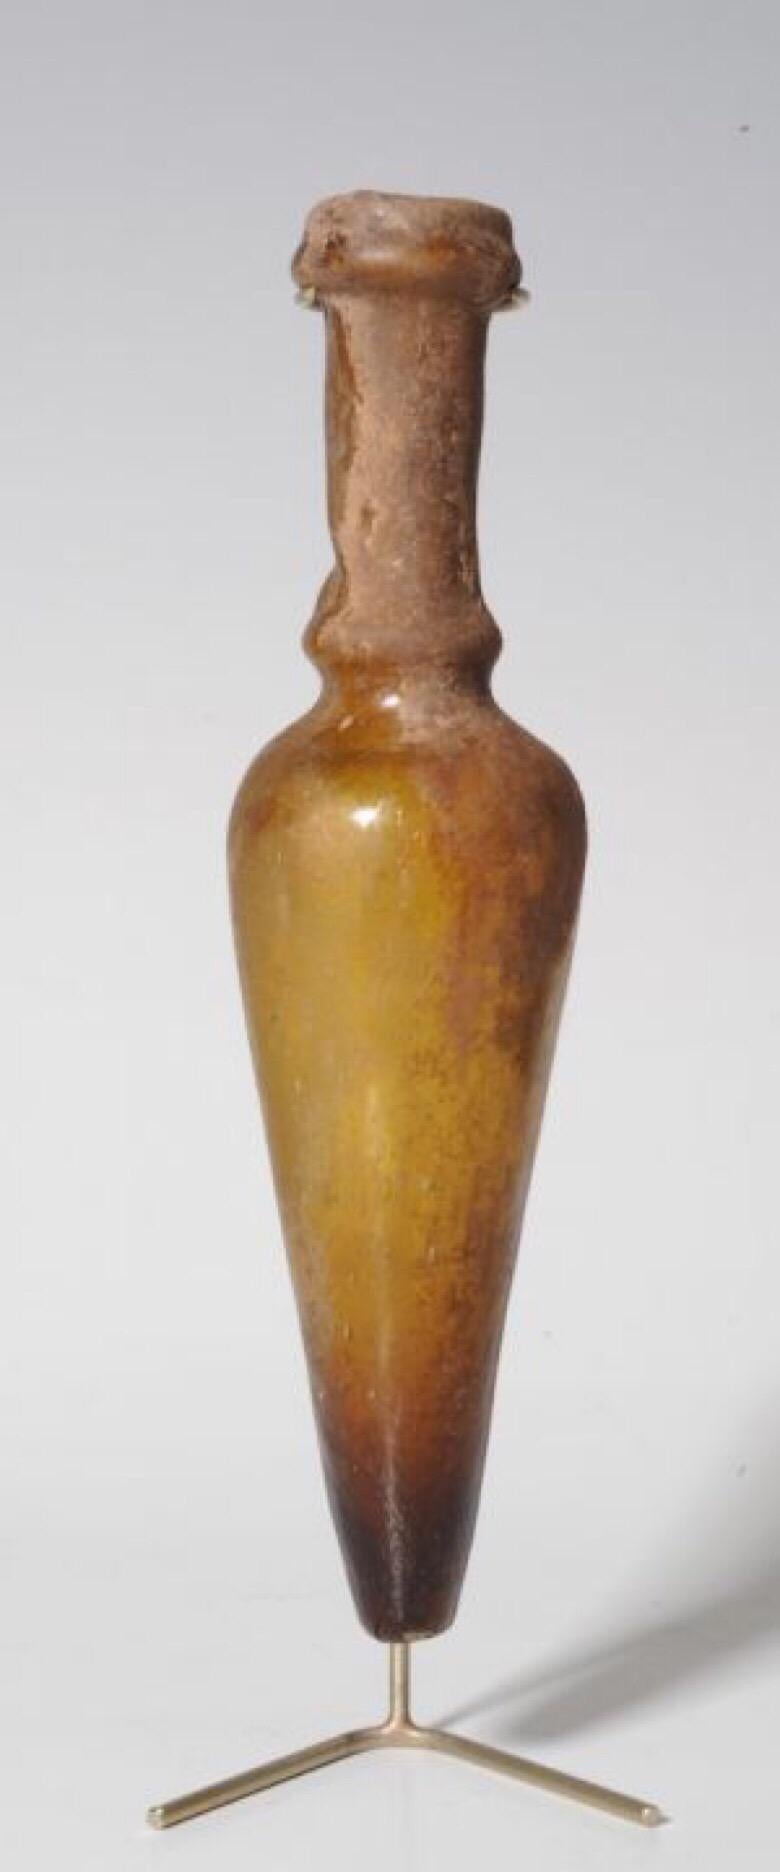 Amphora shaped glass bottle
Eastern Mediterranean, Roman Period, circa 4th century AD.
Amber-colored glass.
Blown Amphora shaped perfume bottle of a rare type.
Condition: Partially sintered, intact.